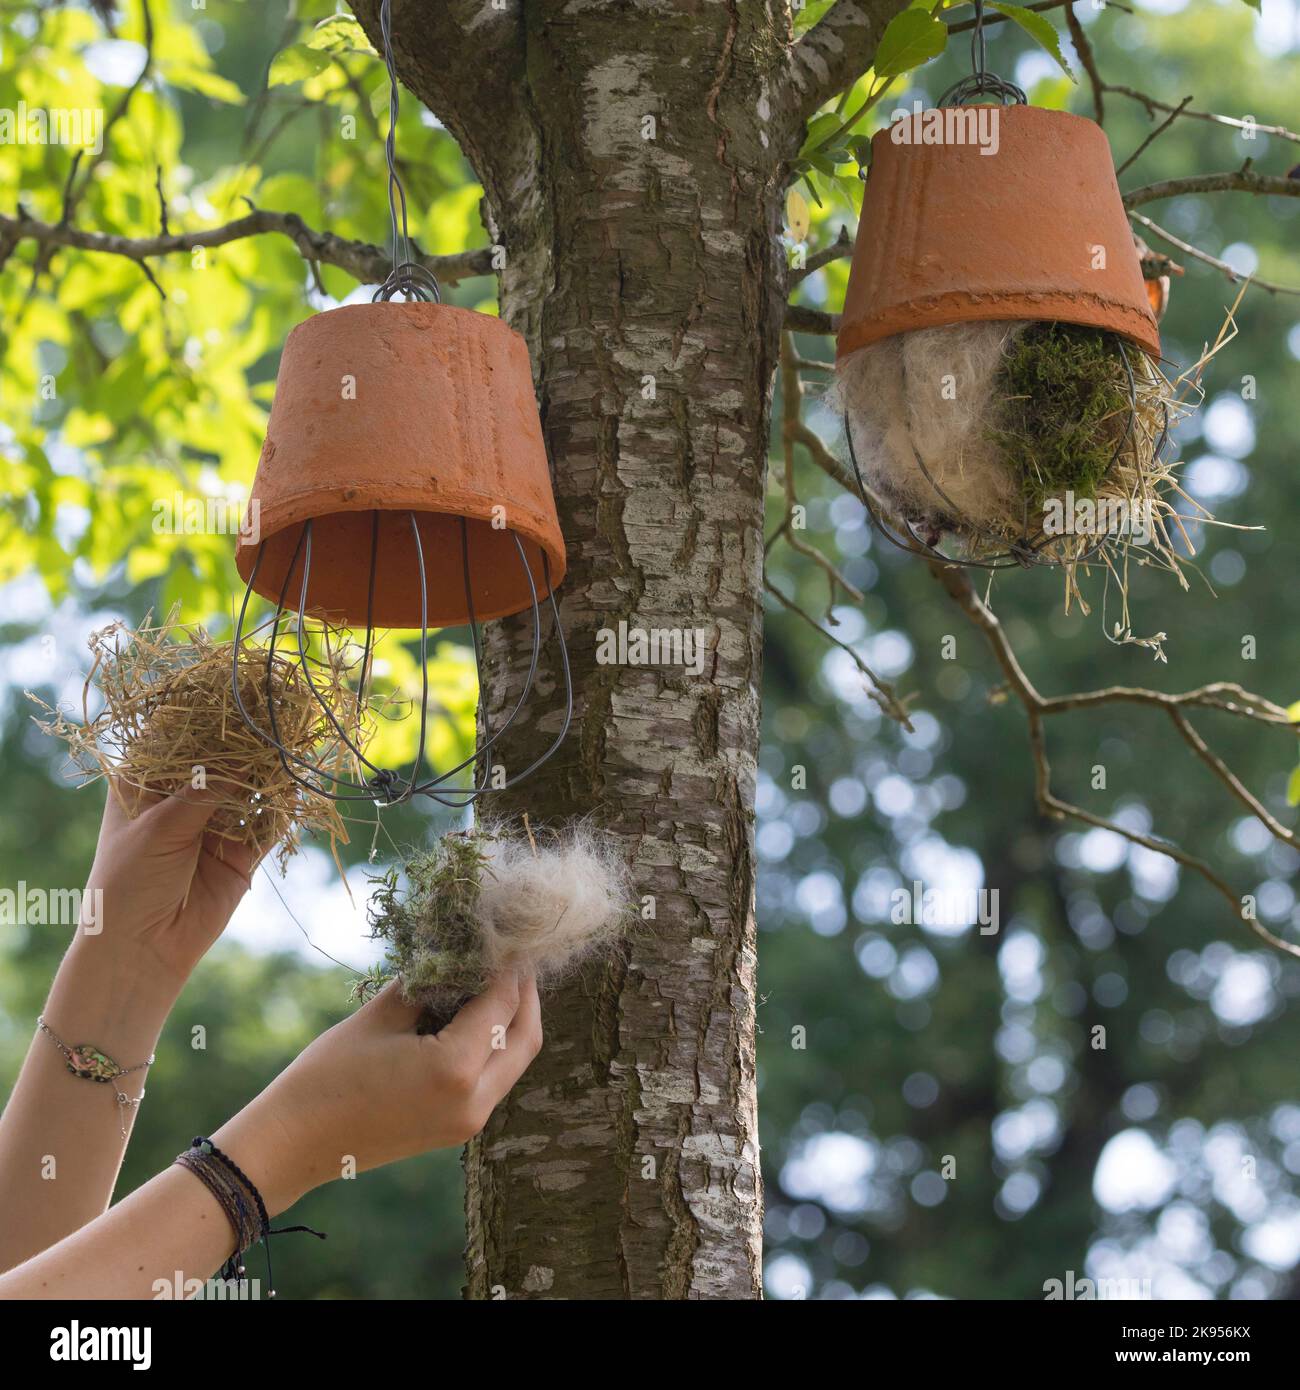 making a dispenser for nesting material for birds or squirrels, step 5: flower pot is filled with nesting material and hung up, series picture 5/5 Stock Photo